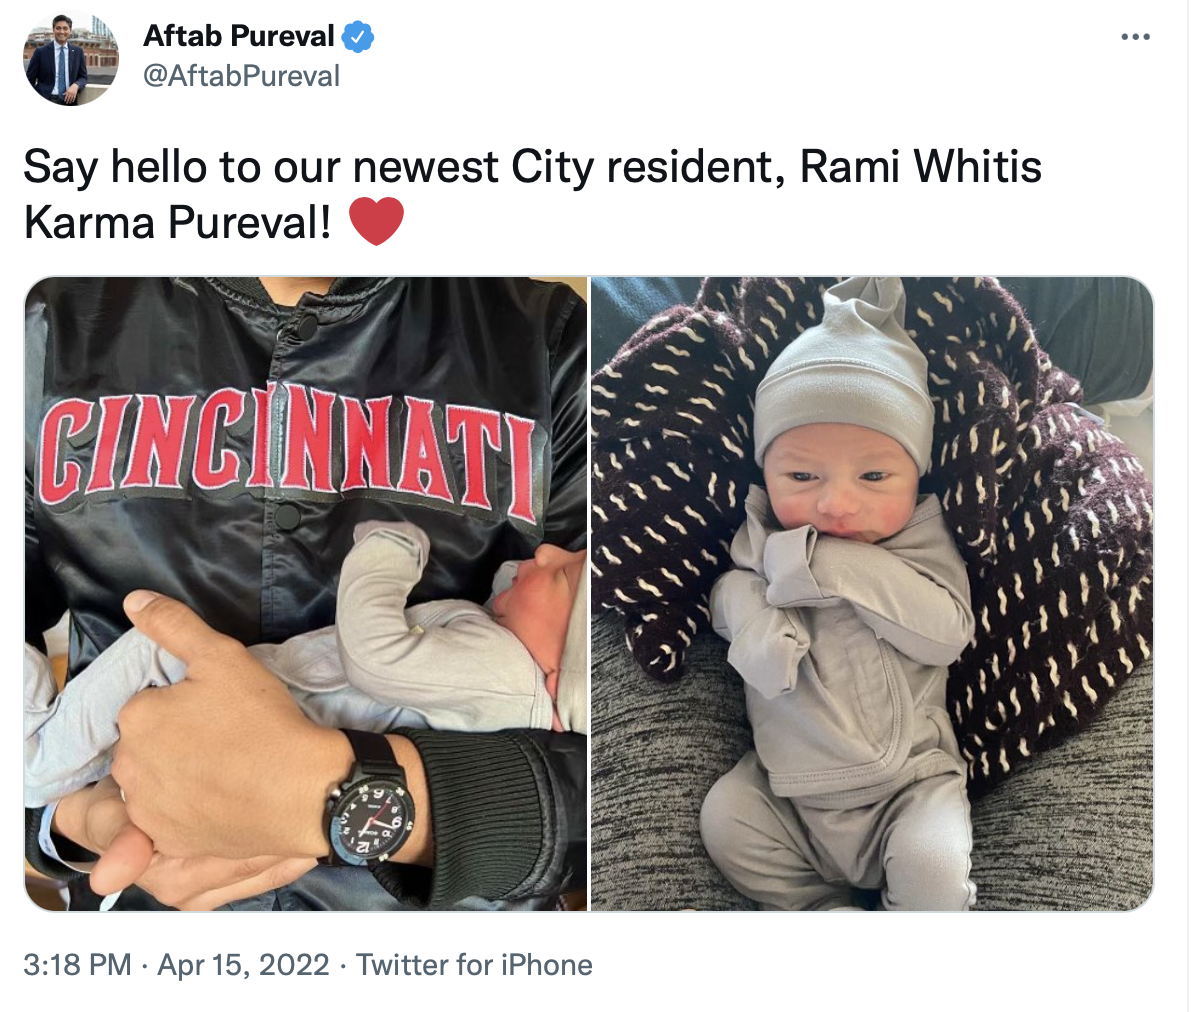 Mayor Pureval posted on Twitter a photo of him with his new son.